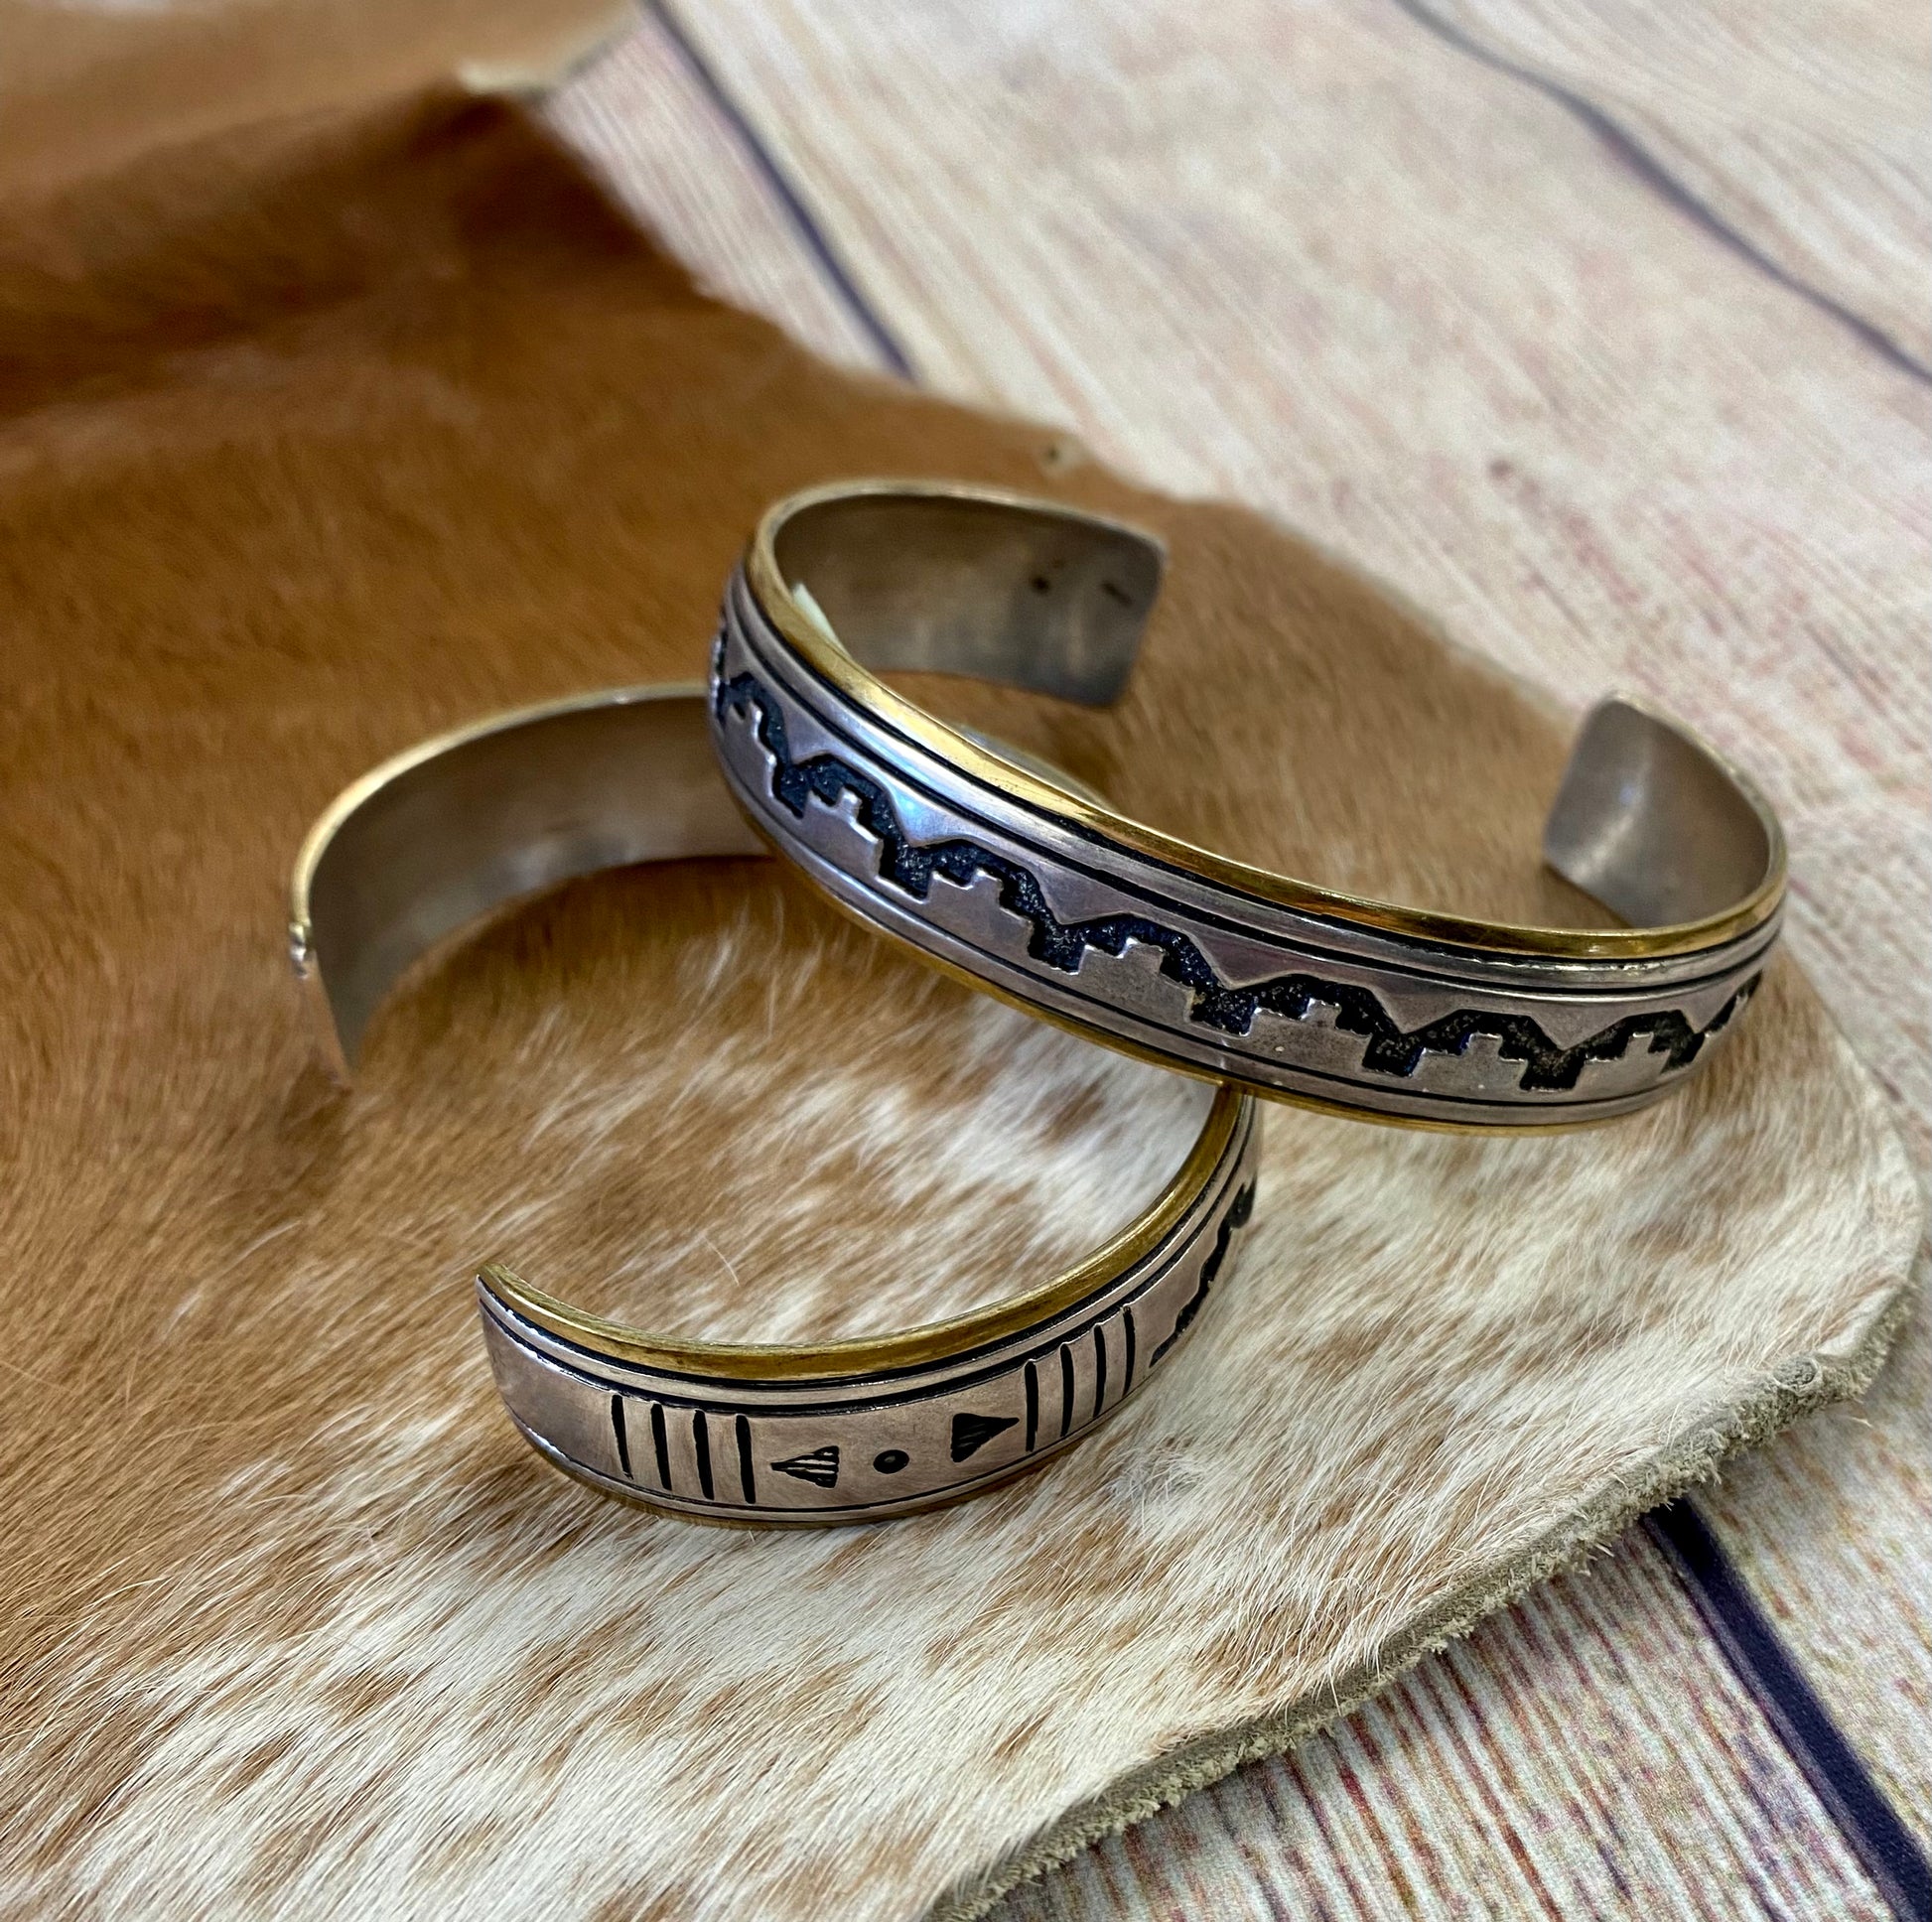 This collection of Navajo-made jewelry includes pieces of original Tommy Singer jewelry pieces. Stamped sterling and signed with Tommy Singer jewelry hallmark. Add a piece of Tommy Singer Native American jewelry to your jewelry collection today! Beautiful Tommy Singer jewelry for sale. Tommy Singer Navajo jewelry is the perfect gift!